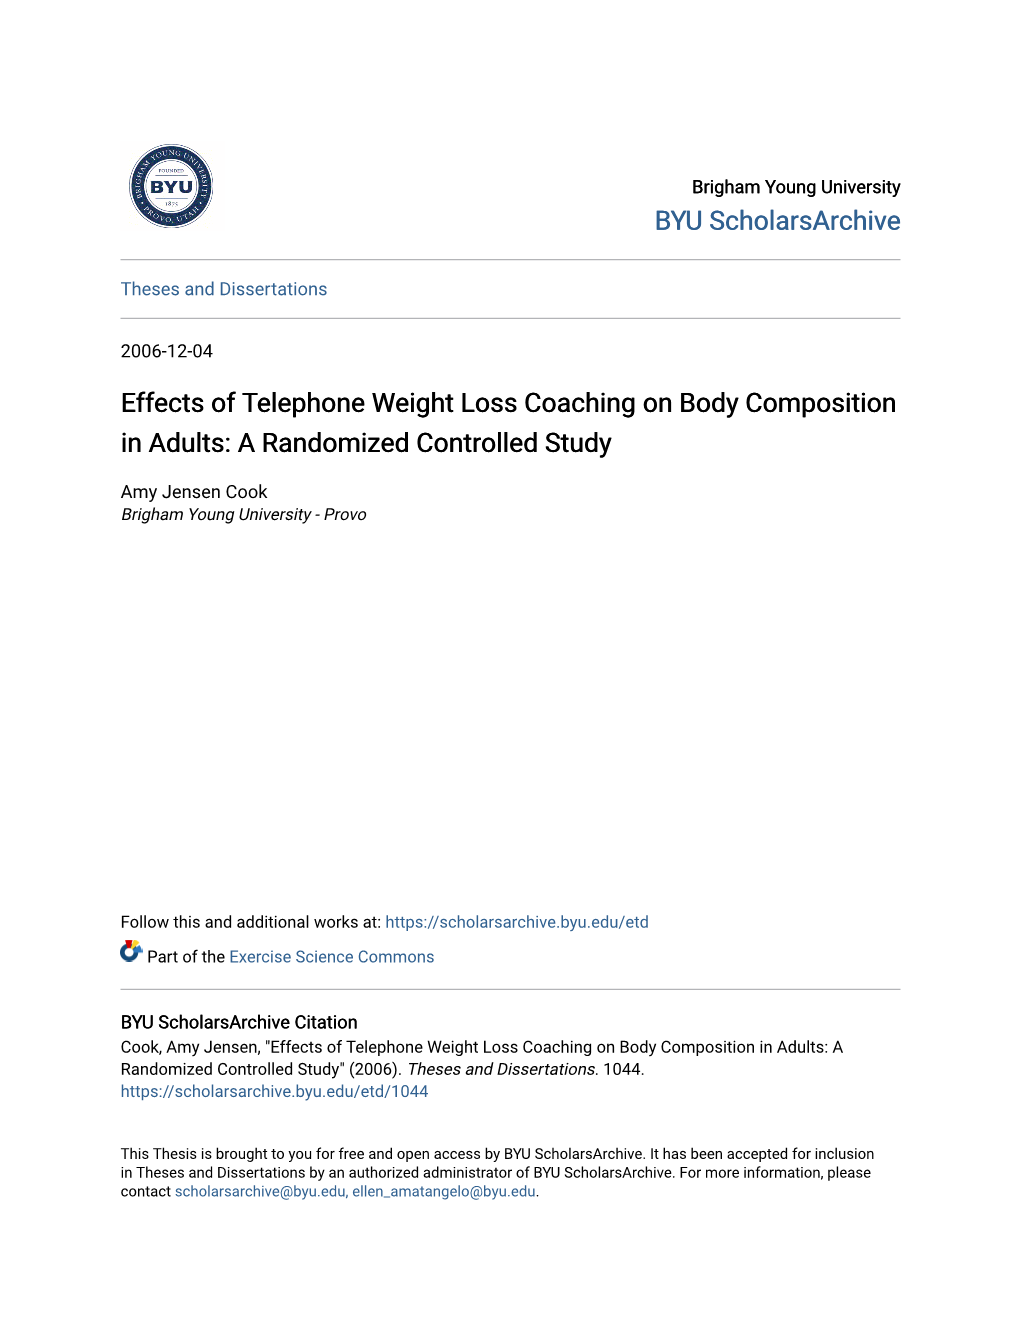 Effects of Telephone Weight Loss Coaching on Body Composition in Adults: a Randomized Controlled Study